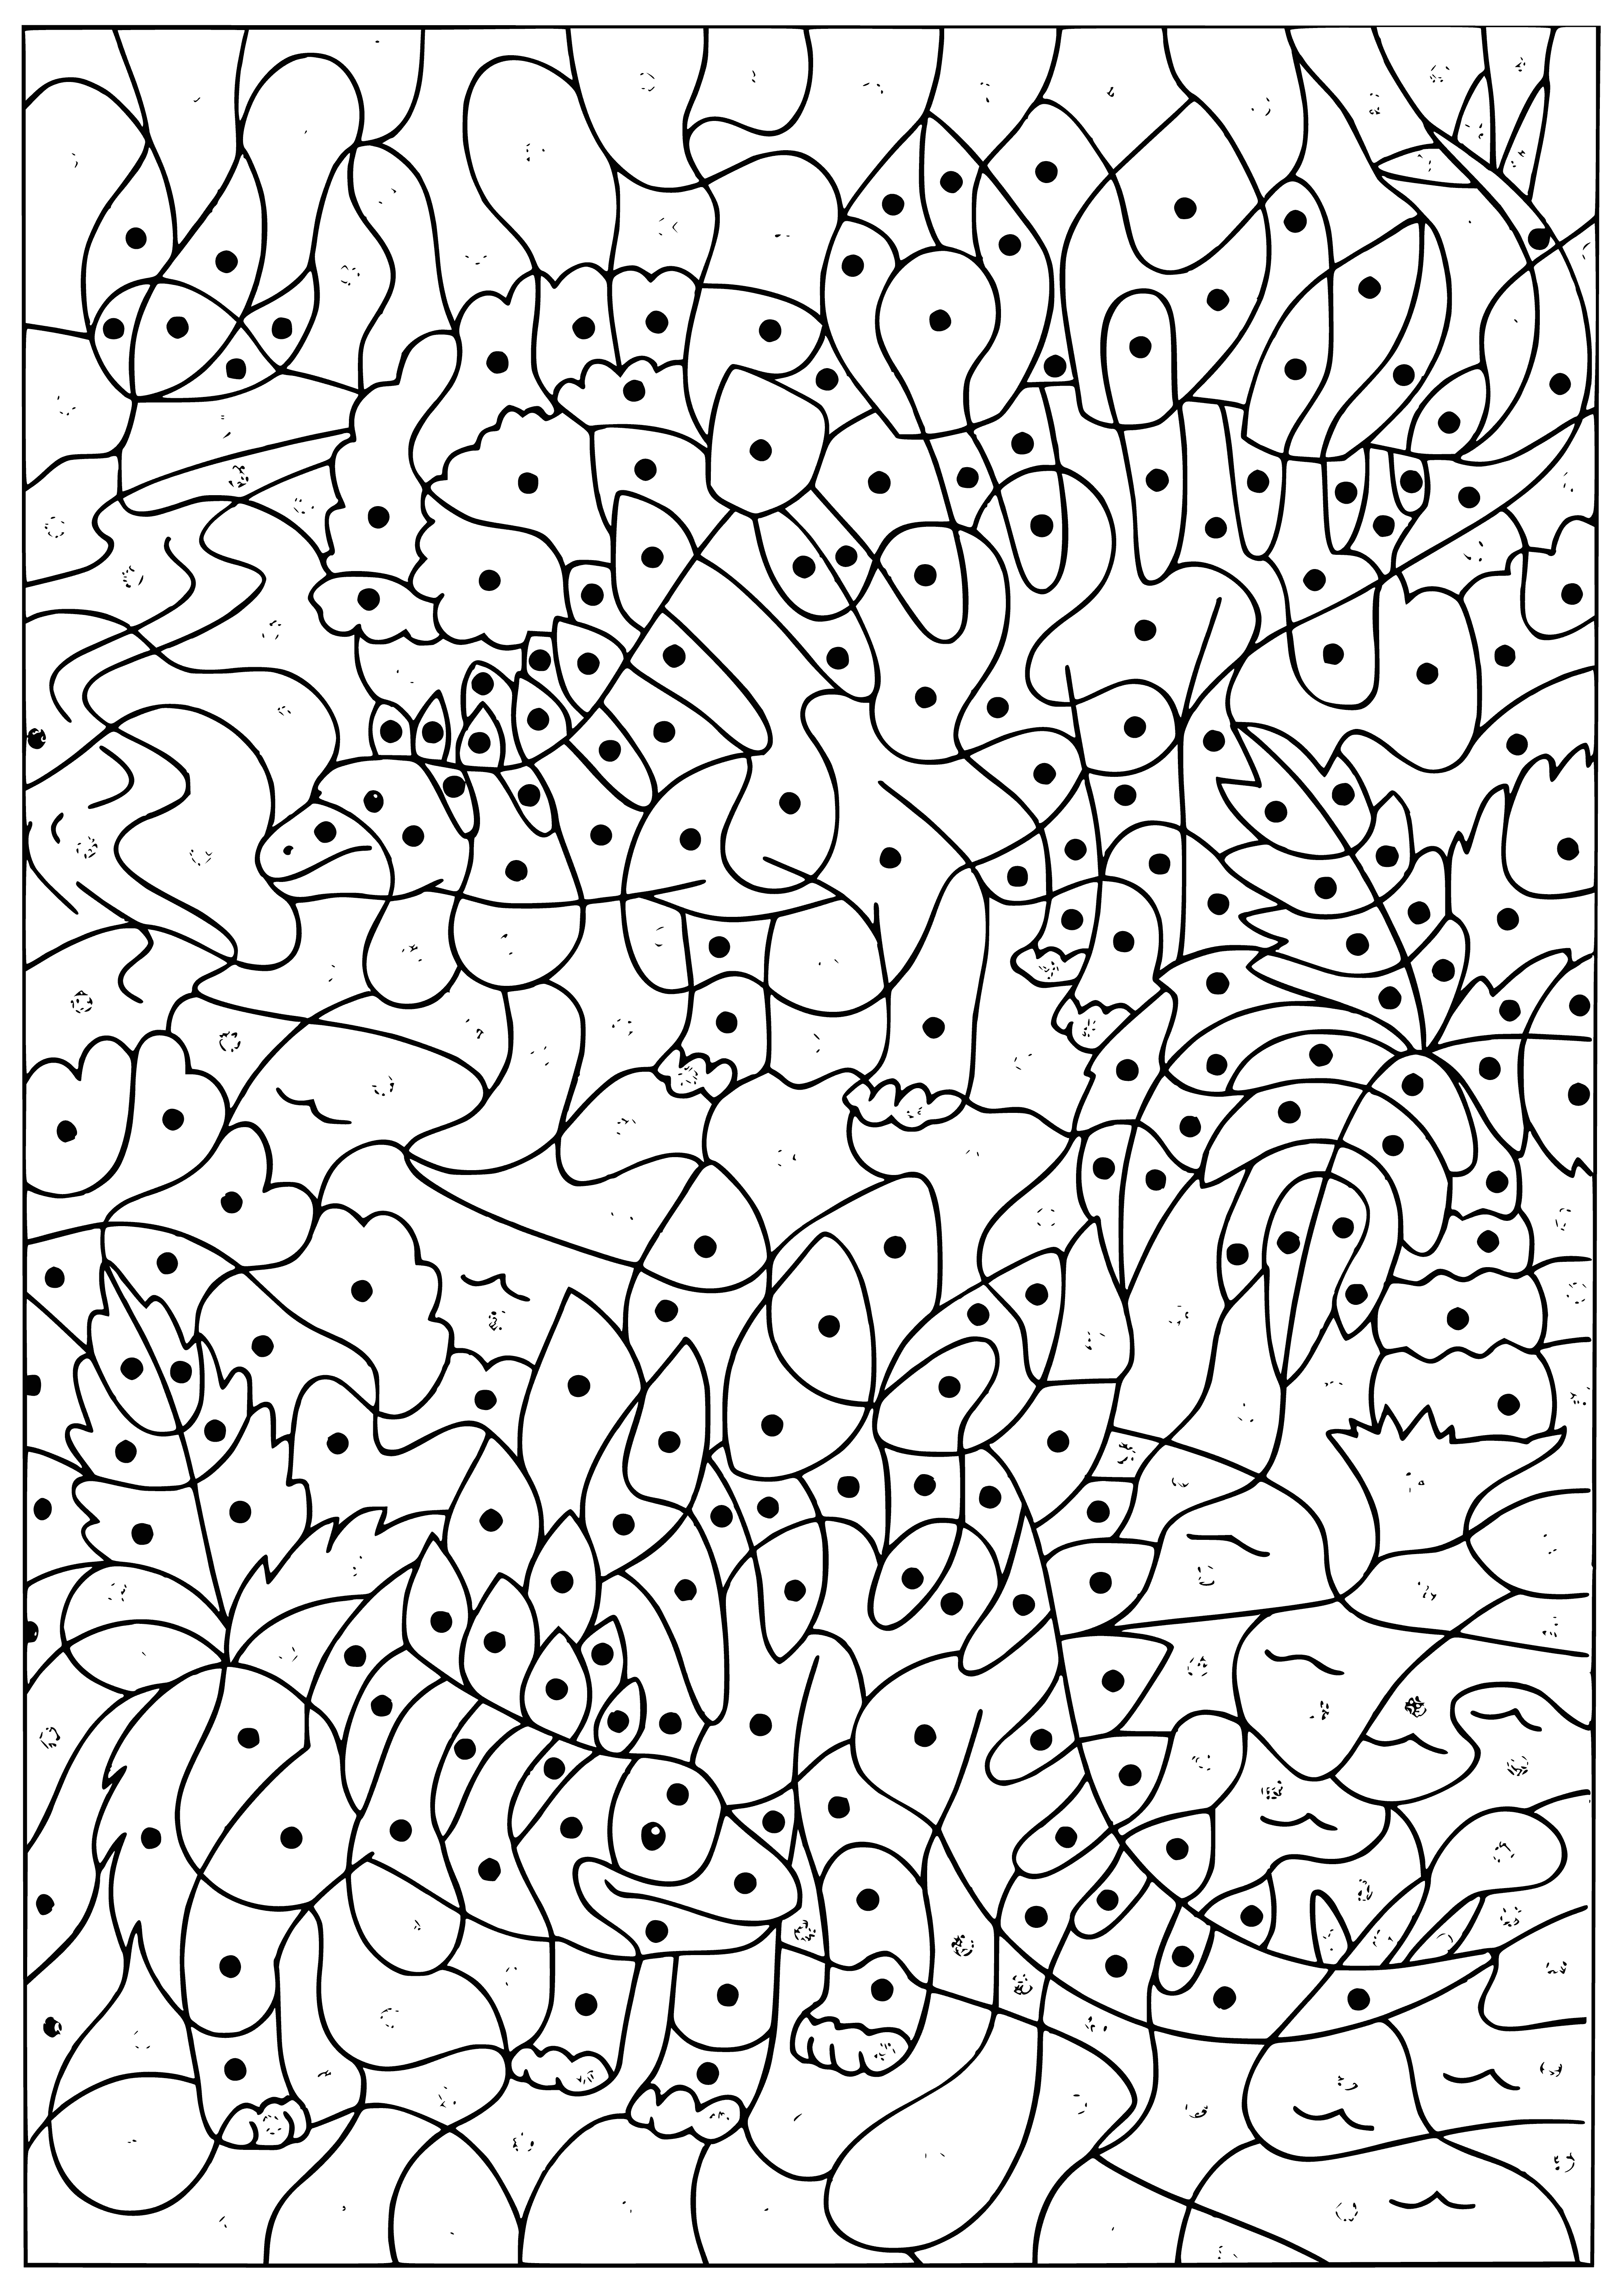 coloring page: Gathering around a pool, dinosaurs of various colors explore a green island with a tree in its center.